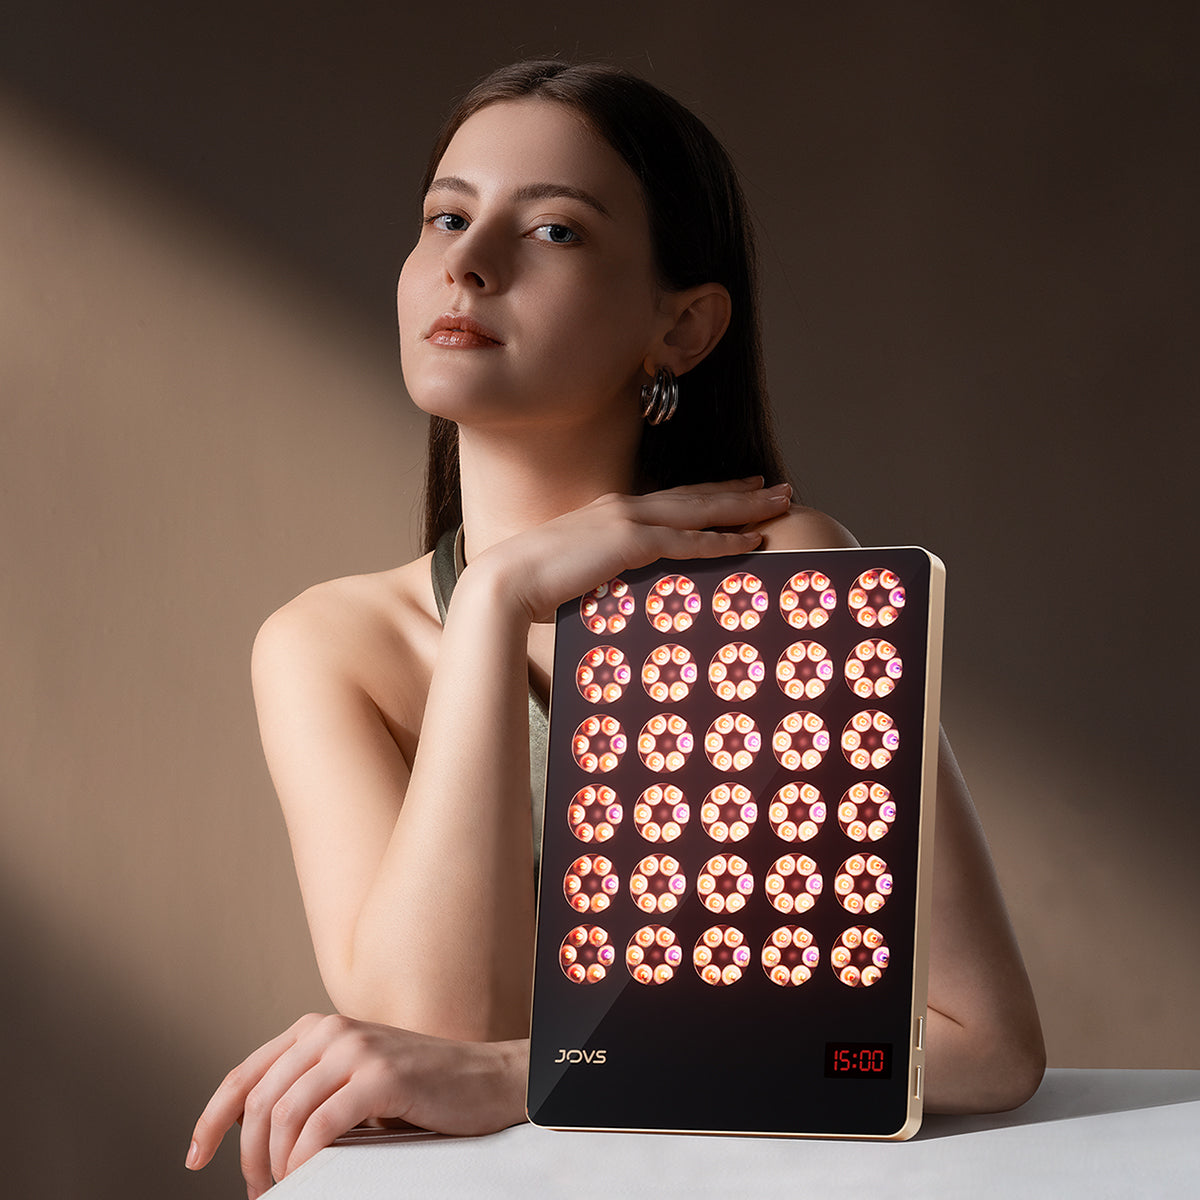 Elegant young woman with JOVS LED light therapy device promoting rejuvenation and skincare health.